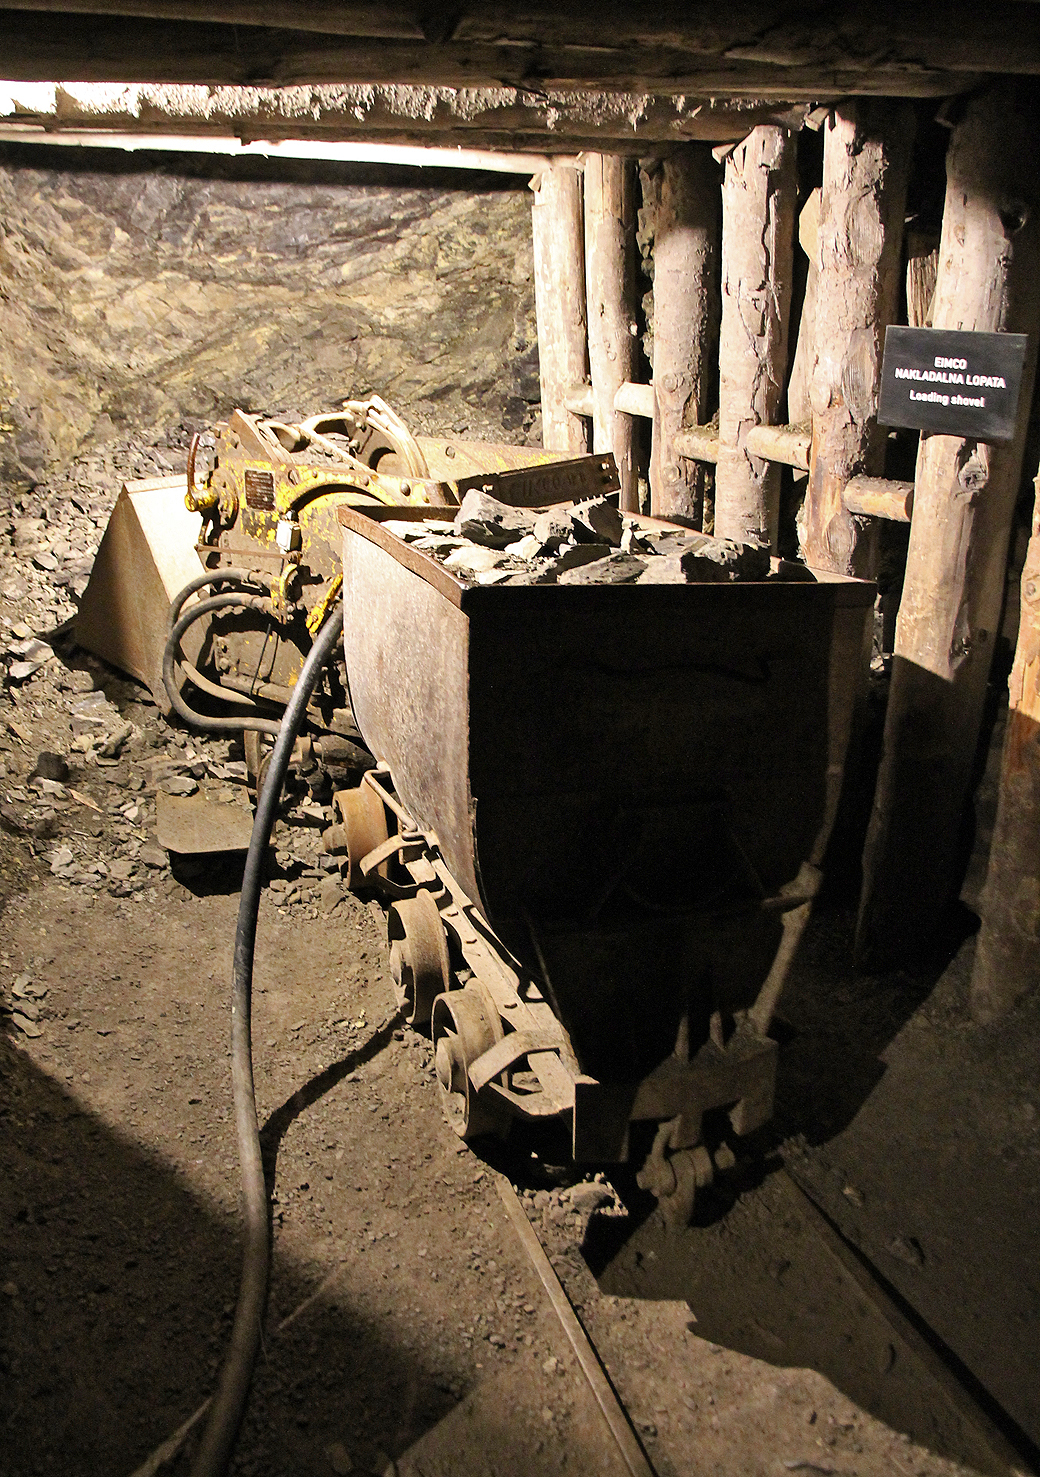 Mining cart in the deepest part of our visit.